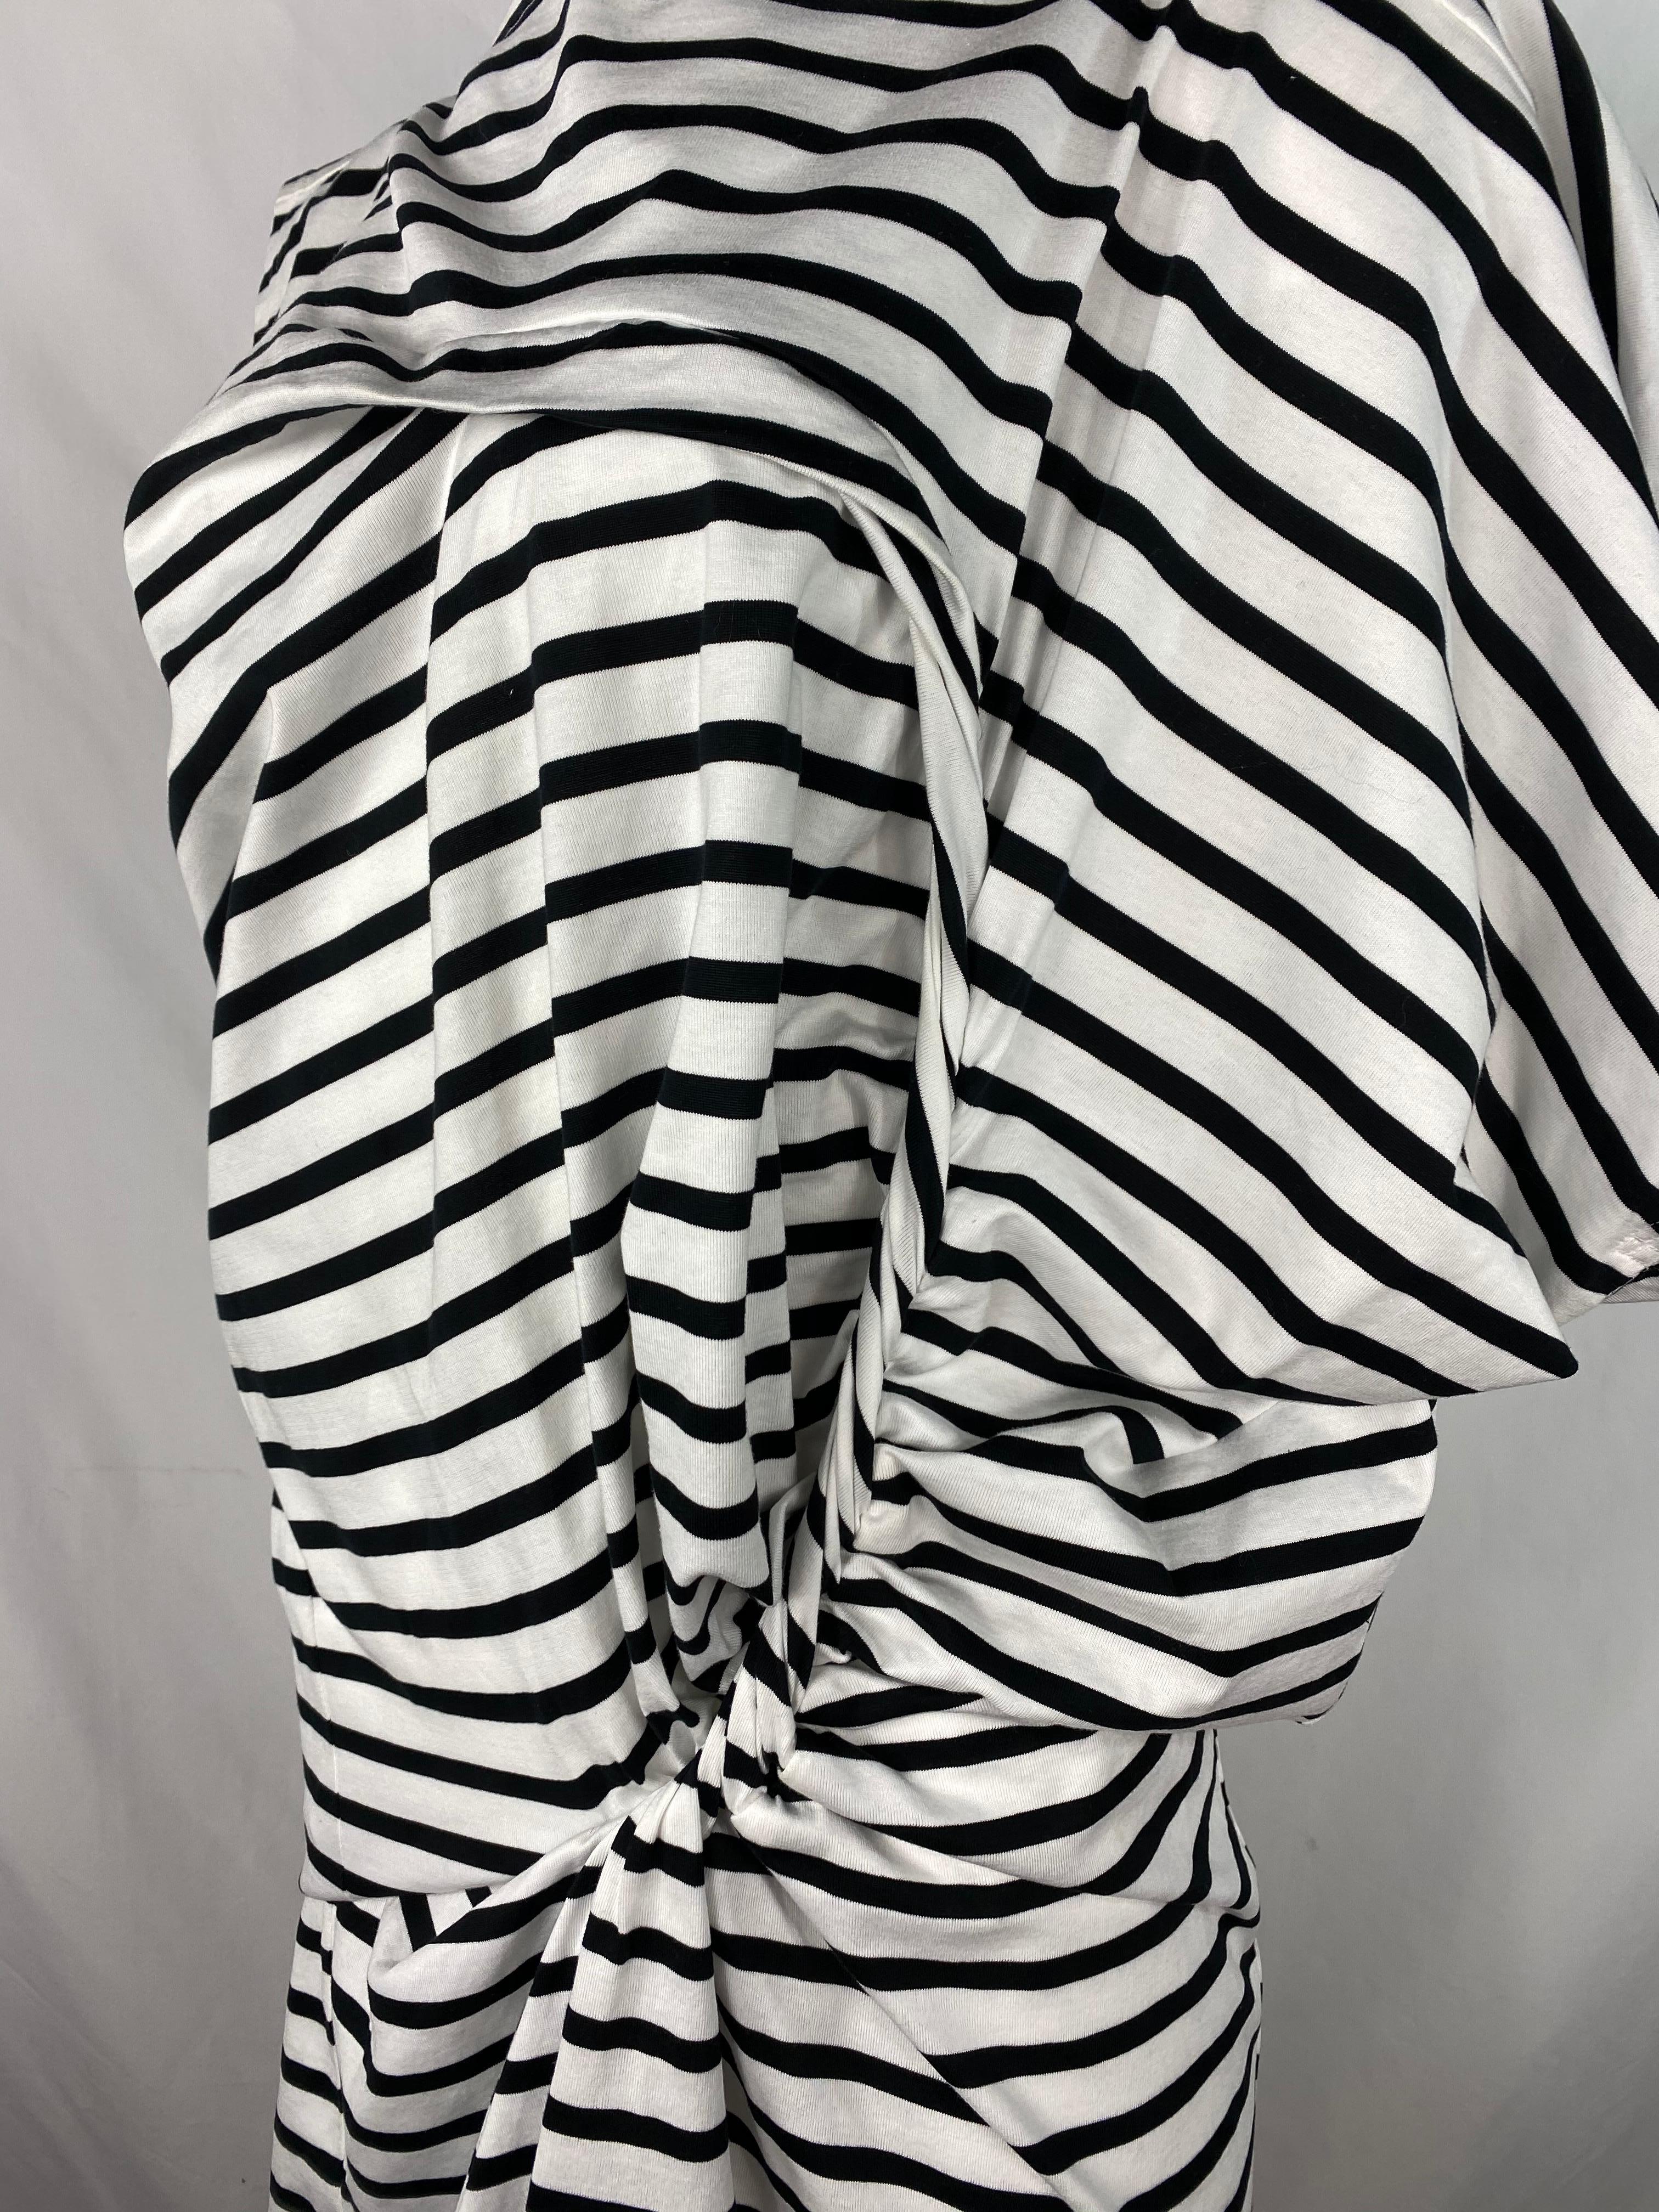 Gray Junya Watanabe Comme Des Garcons Black and White Striped Mini Dress, Size S